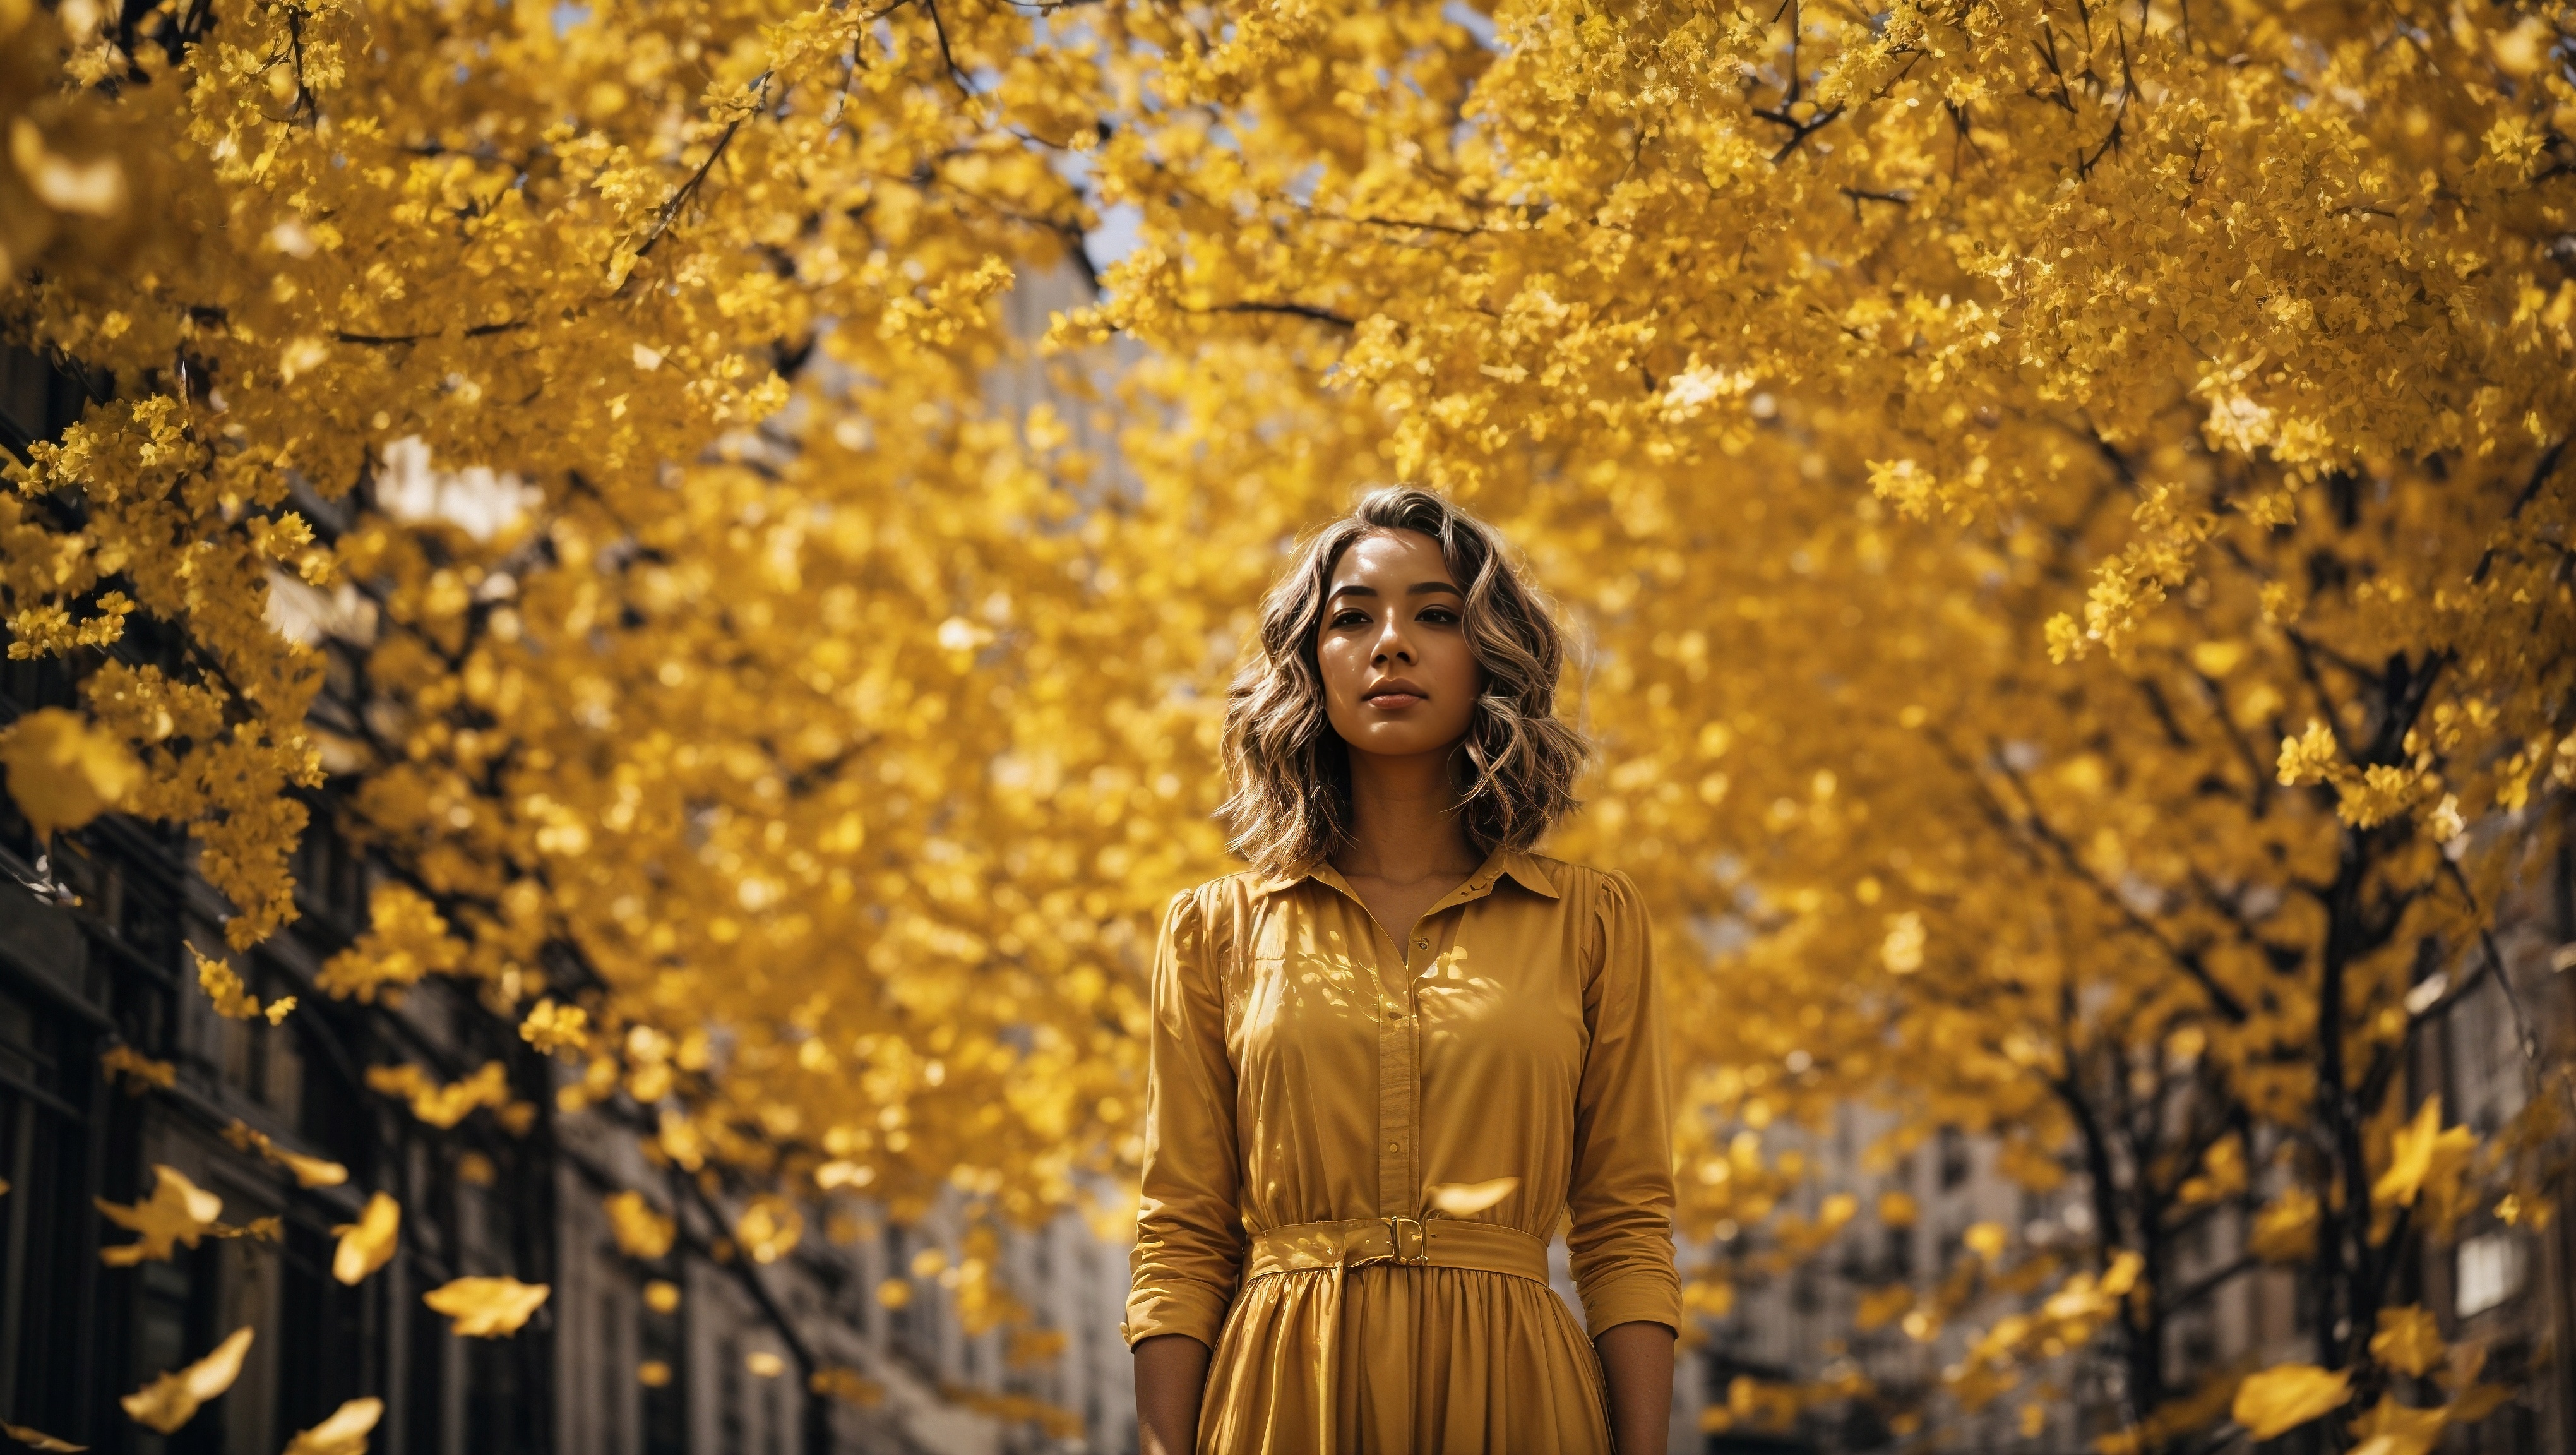 Free photo A girl in a yellow dress is standing under a tree full of yellow leaves